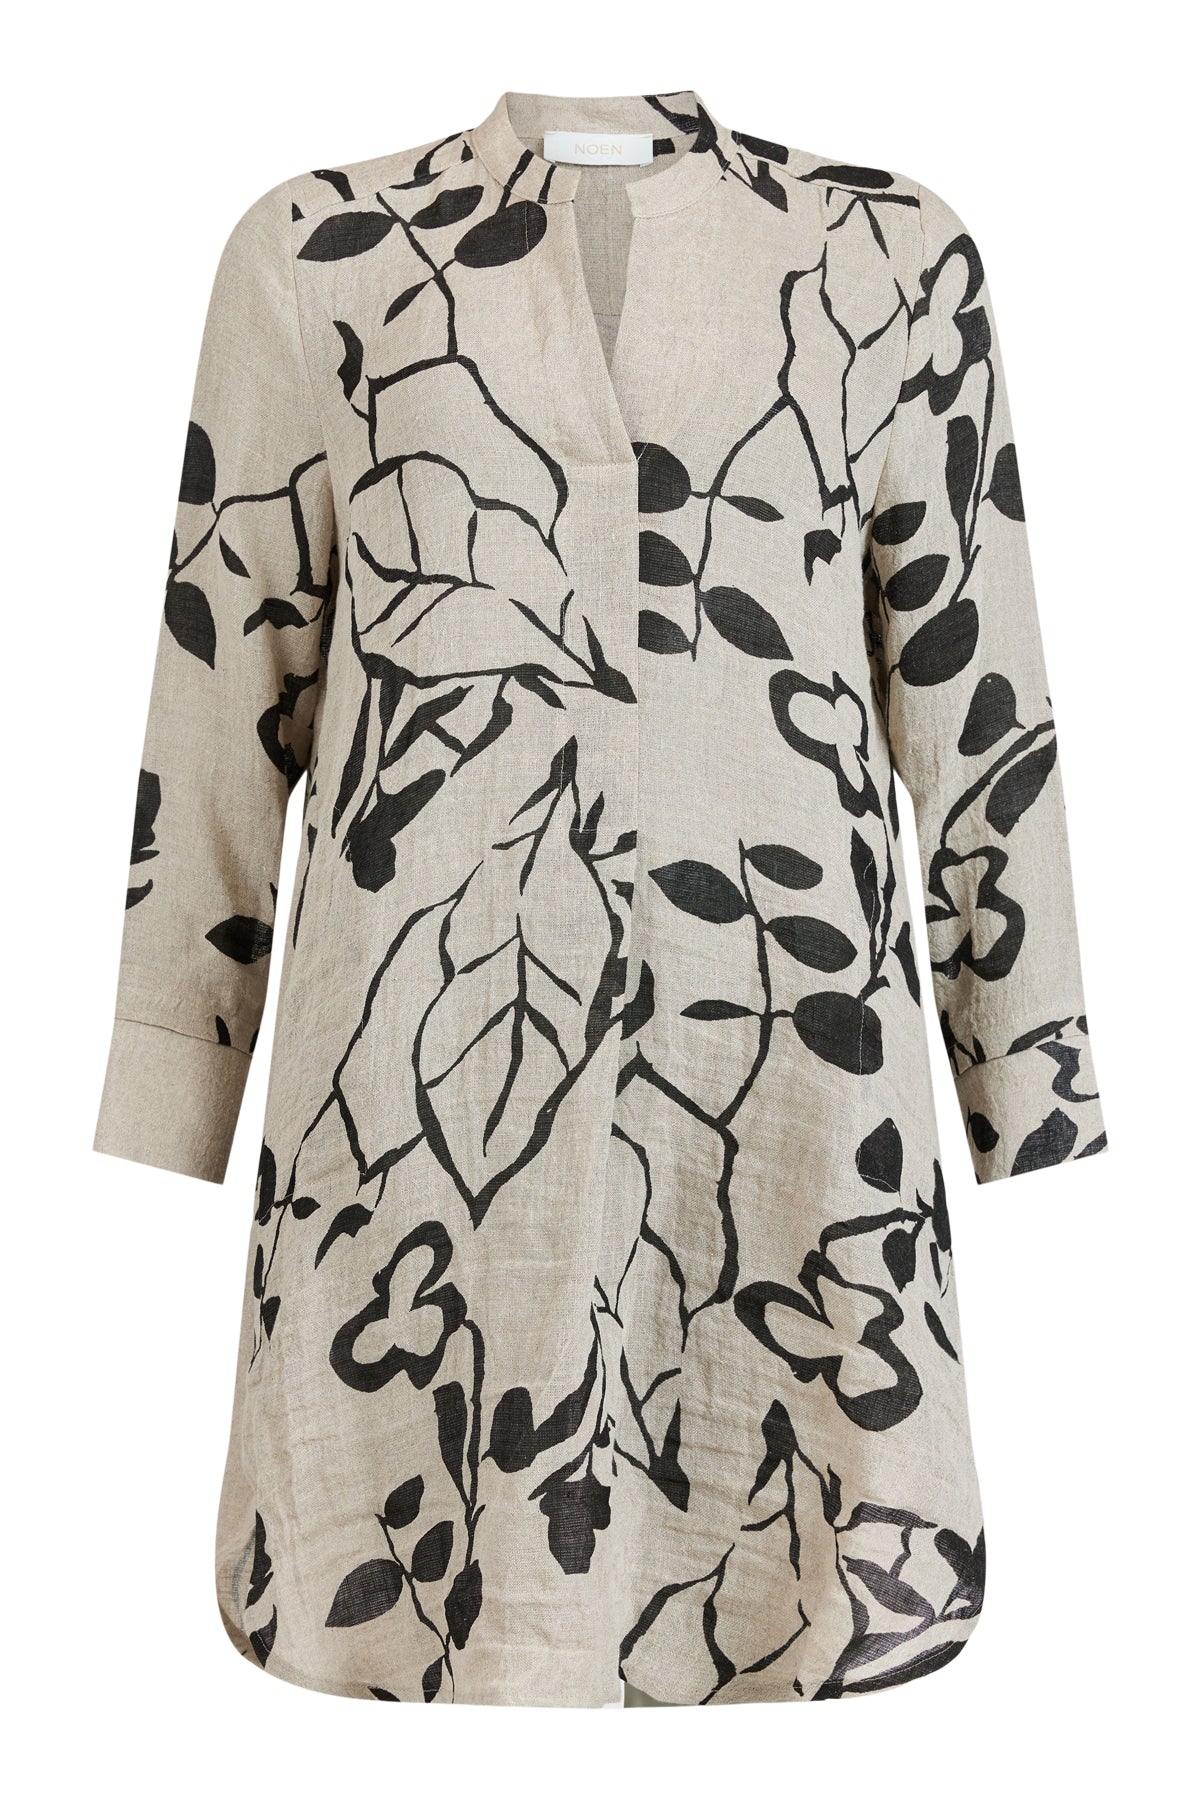 Noen Sand Texture Tunic/Dress With Leaf Print